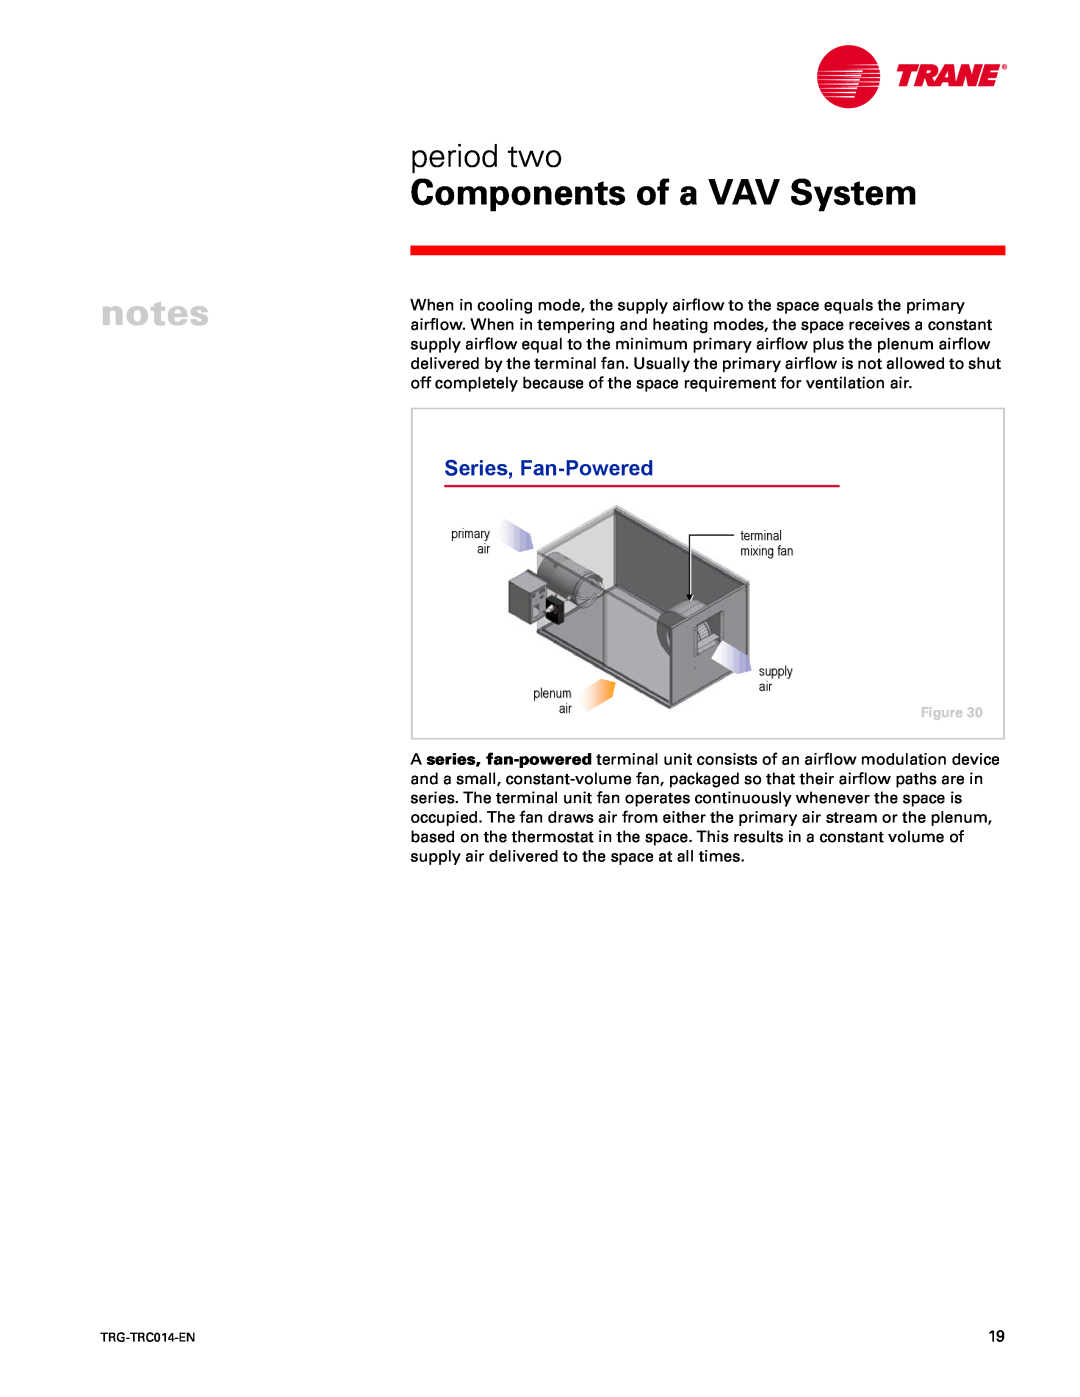 Trane TRG-TRC014-EN manual Series, Fan-Powered, Components of a VAV System, period two 